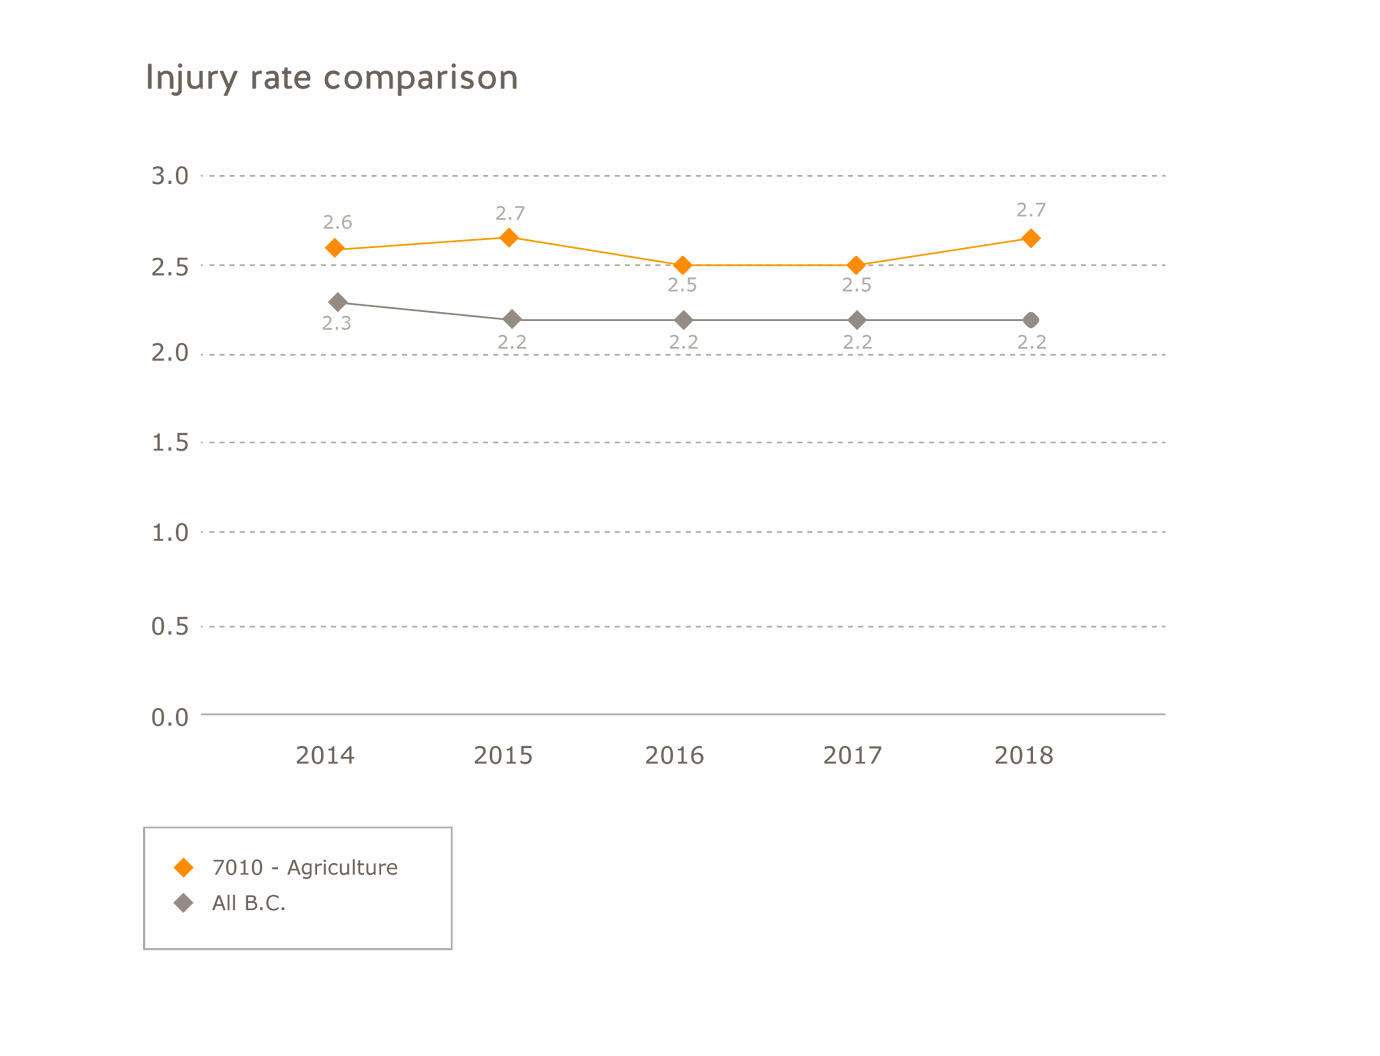 Agriculture injury rate comparison by sector. All B.C.: 2014=2.3; 2015=2.2; 2016=2.2; 2017=2.2, 2018=2.2. Agriculture: 2014=2.6; 2015=2.7; 2016=2.5; 2017=2.5; 2018=2.7.